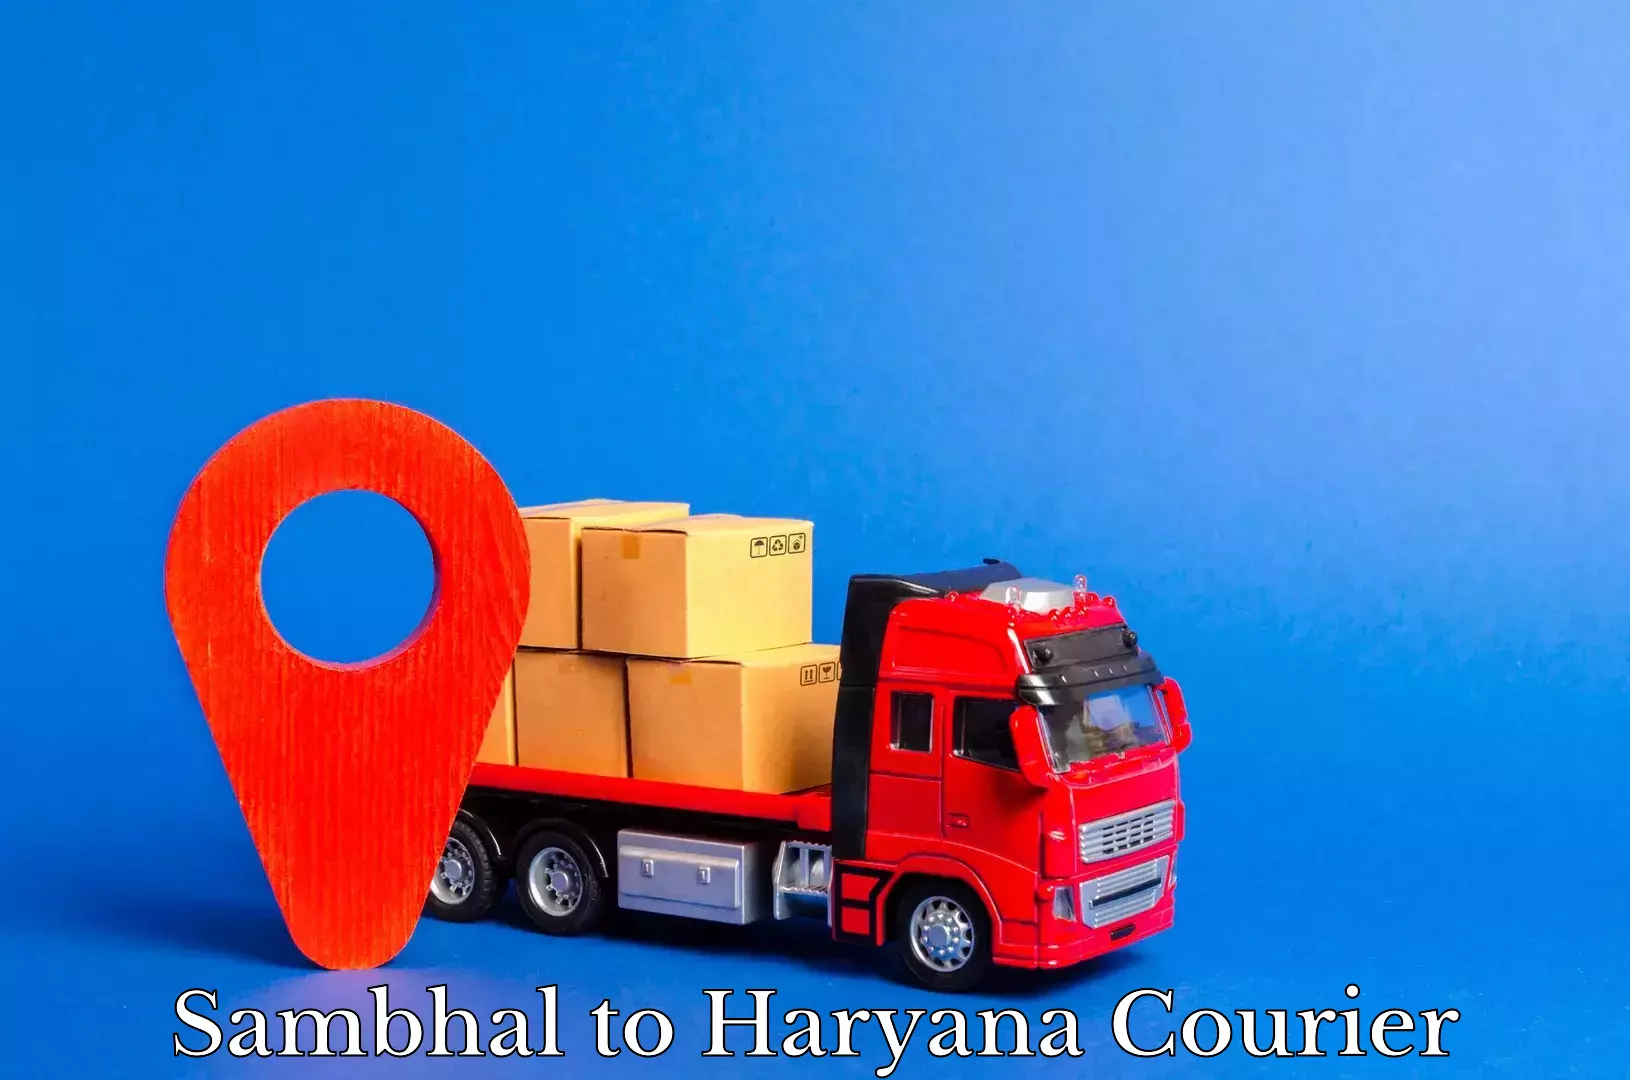 Package delivery network Sambhal to Haryana